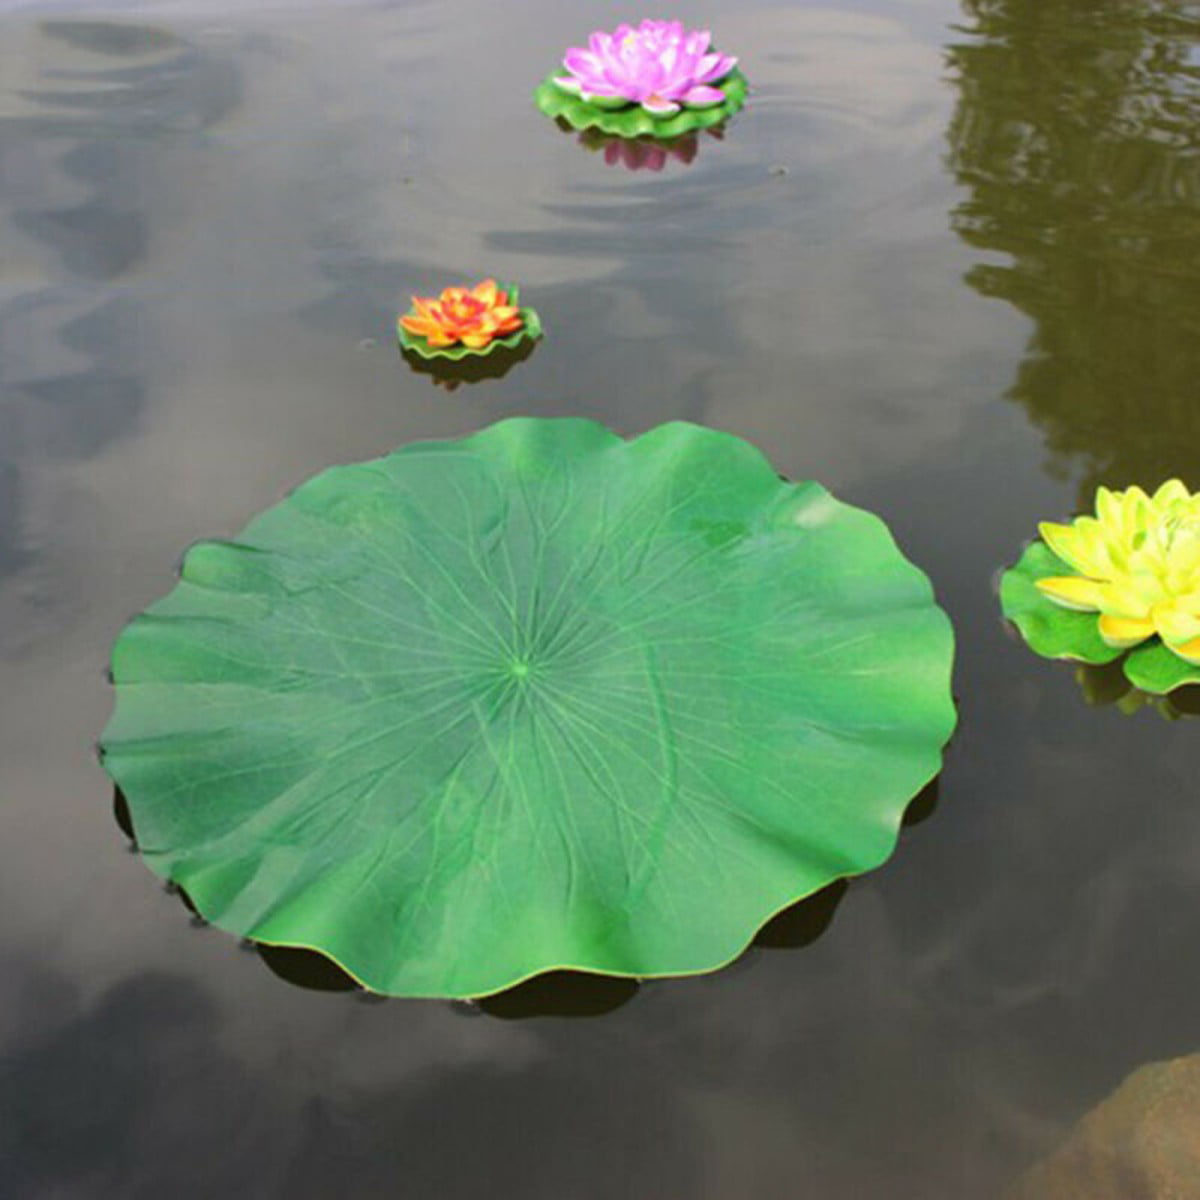 Details about   6PCS Artificial Fake Lotus Leaf Flowers Water Lily Floating Pool Plants Decor